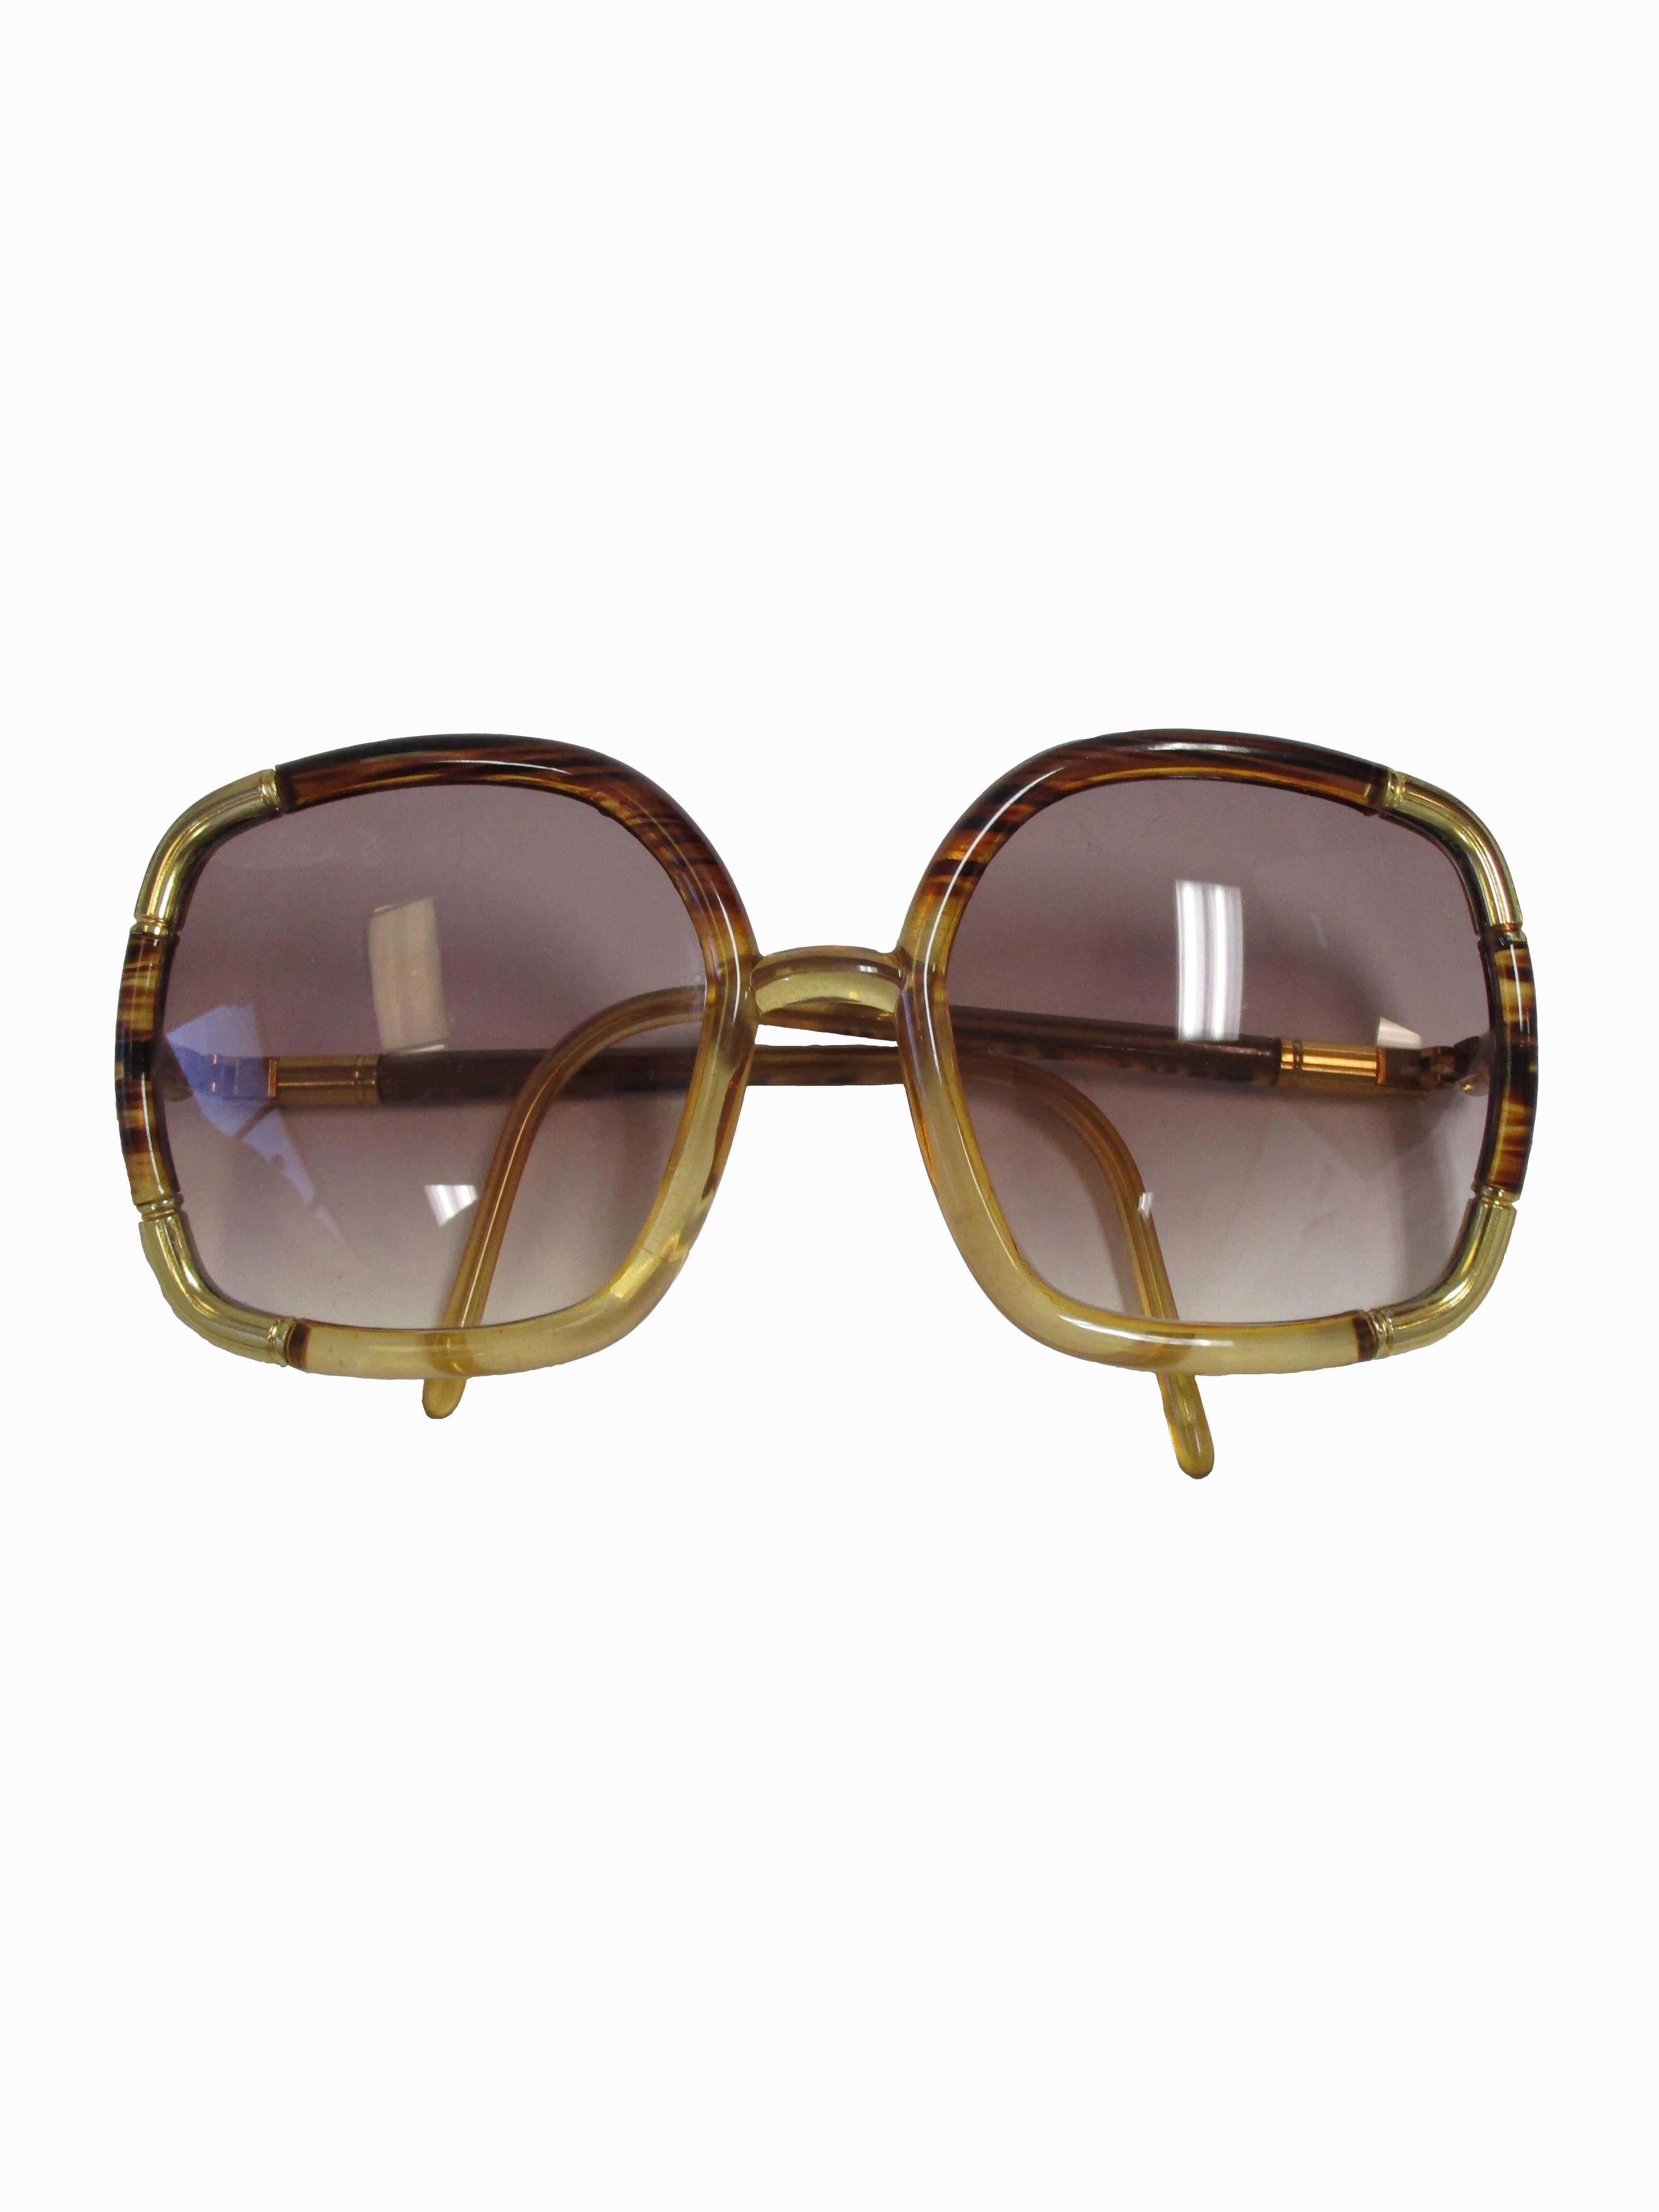 1970s Ted Lapidus Paris Gold Accented Tortoise Over-sized Sunglasses  For Sale 1